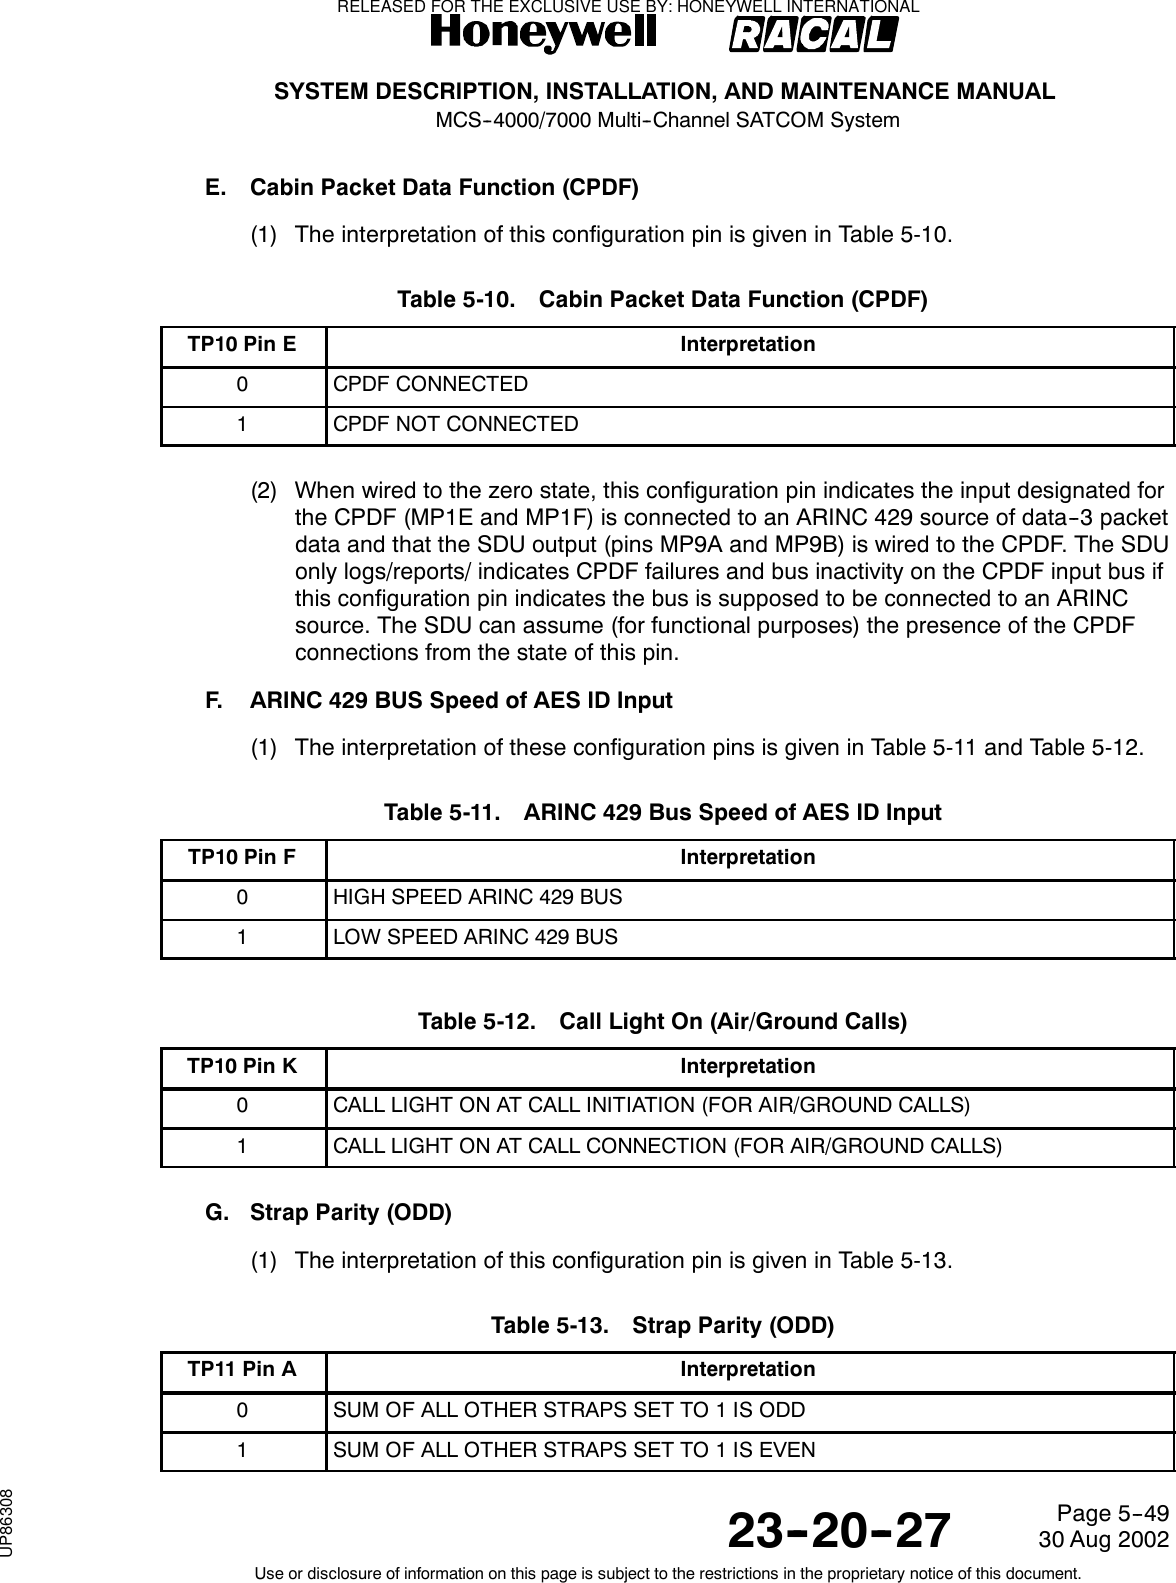 SYSTEM DESCRIPTION, INSTALLATION, AND MAINTENANCE MANUALMCS--4000/7000 Multi--Channel SATCOM System23--20--2730 Aug 2002Use or disclosure of information on this page is subject to the restrictions in the proprietary notice of this document.Page 5--49E. Cabin Packet Data Function (CPDF)(1) The interpretation of this configuration pin is given in Table 5-10.Table 5-10. Cabin Packet Data Function (CPDF)TP10 Pin E Interpretation0CPDF CONNECTED1CPDF NOT CONNECTED(2) When wired to the zero state, this configuration pin indicates the input designated forthe CPDF (MP1E and MP1F) is connected to an ARINC 429 source of data--3 packetdata and that the SDU output (pins MP9A and MP9B) is wired to the CPDF. The SDUonly logs/reports/ indicates CPDF failures and bus inactivity on the CPDF input bus ifthis configuration pin indicates the bus is supposed to be connected to an ARINCsource. The SDU can assume (for functional purposes) the presence of the CPDFconnections from the state of this pin.F. ARINC 429 BUS Speed of AES ID Input(1) The interpretation of these configuration pins is given in Table 5-11 and Table 5-12.Table 5-11. ARINC 429 Bus Speed of AES ID InputTP10 Pin F Interpretation0HIGH SPEED ARINC 429 BUS1LOW SPEED ARINC 429 BUSTable 5-12. Call Light On (Air/Ground Calls)TP10 Pin K Interpretation0CALL LIGHT ON AT CALL INITIATION (FOR AIR/GROUND CALLS)1CALL LIGHT ON AT CALL CONNECTION (FOR AIR/GROUND CALLS)G. Strap Parity (ODD)(1) The interpretation of this configuration pin is given in Table 5-13.Table 5-13. Strap Parity (ODD)TP11 Pin A Interpretation0SUM OF ALL OTHER STRAPS SET TO 1 IS ODD1SUM OF ALL OTHER STRAPS SET TO 1 IS EVENRELEASED FOR THE EXCLUSIVE USE BY: HONEYWELL INTERNATIONALUP86308